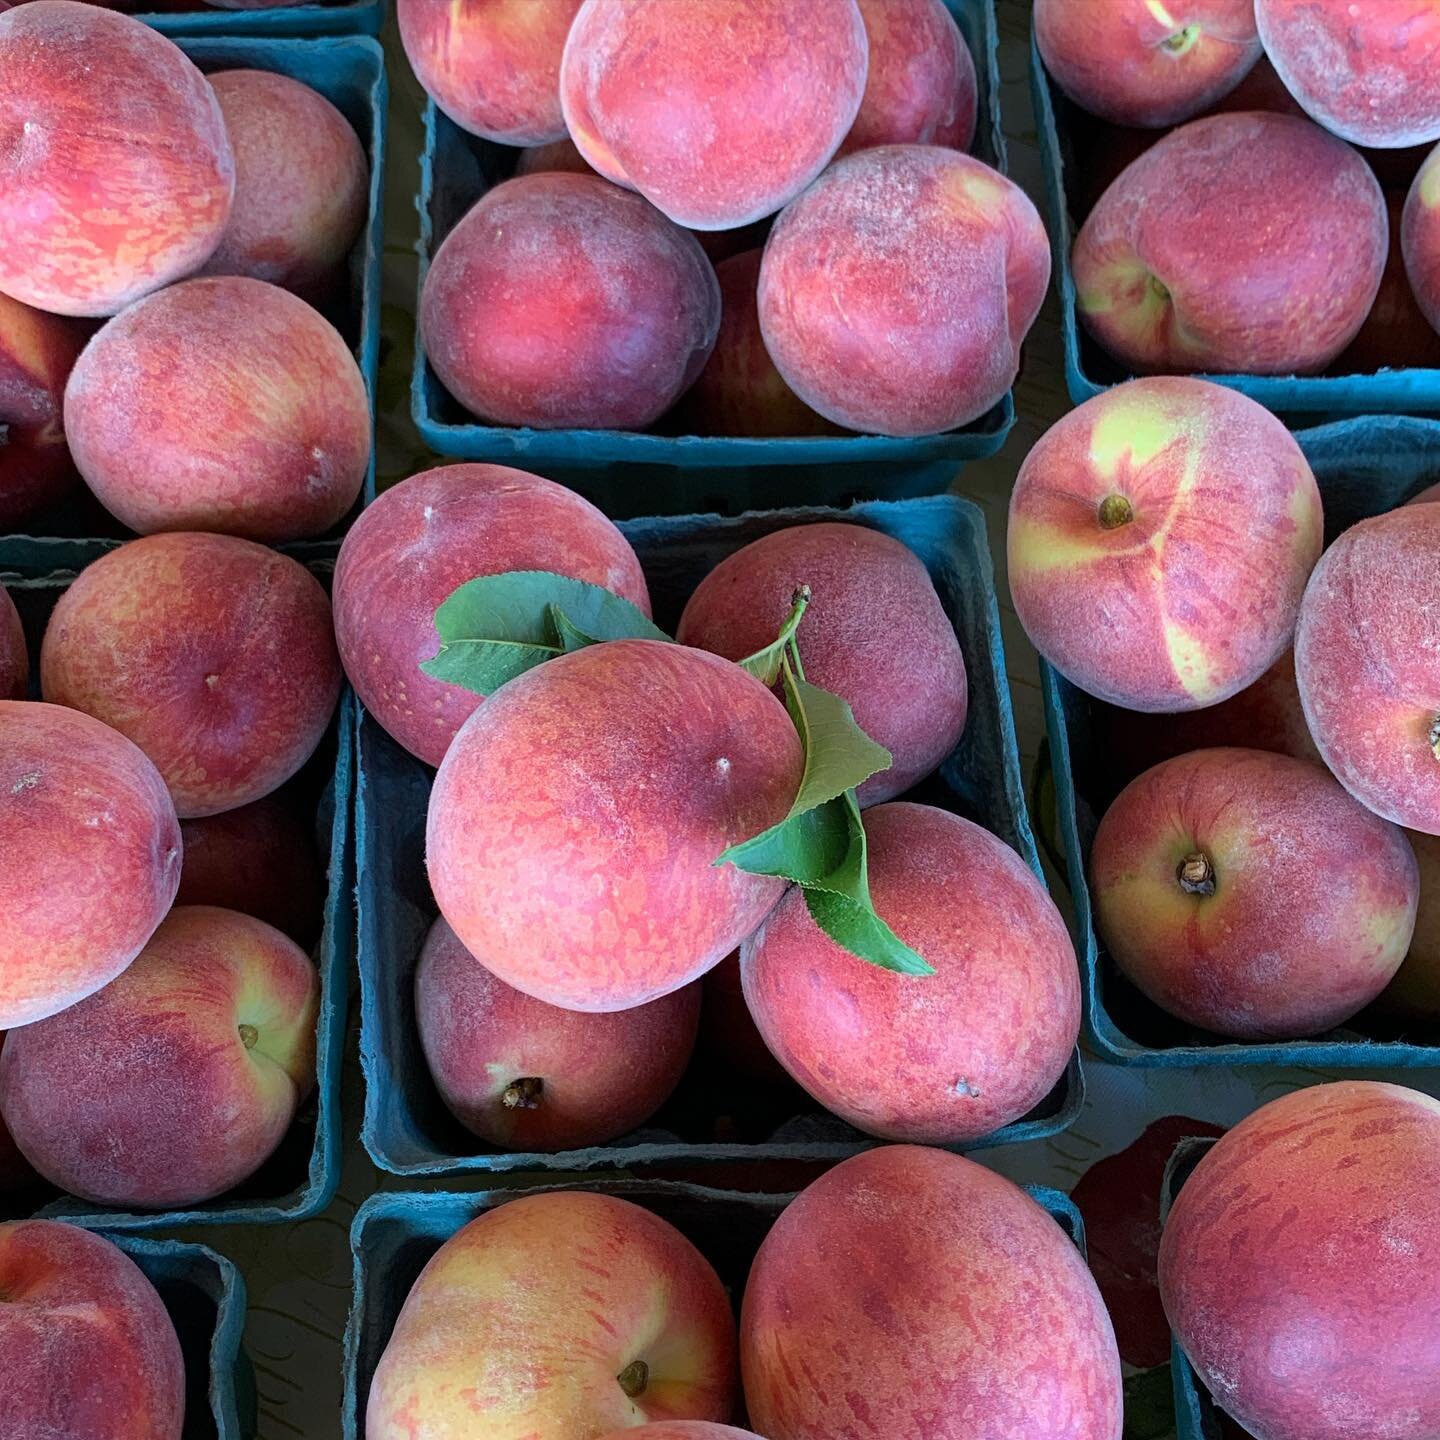 Peach season has started! We have fresh peaches available in our stand for $7 a quart. Peach cobbler is calling your name! 🍑🍑🍑🍑🍑